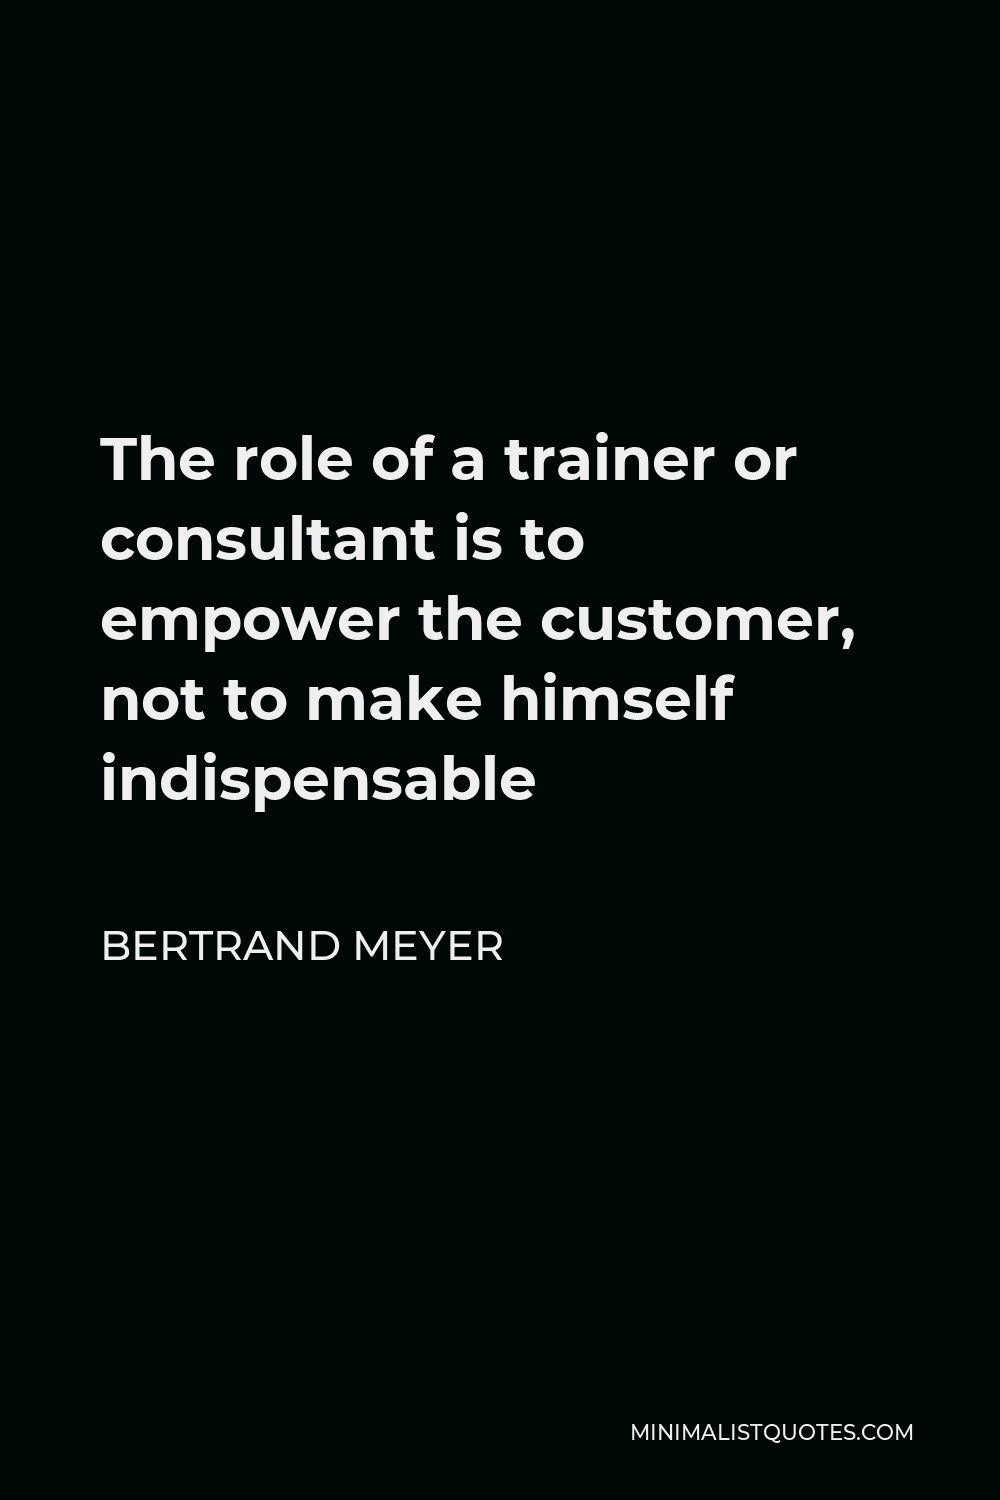 Bertrand Meyer Quote - The role of a trainer or consultant is to empower the customer, not to make himself indispensable